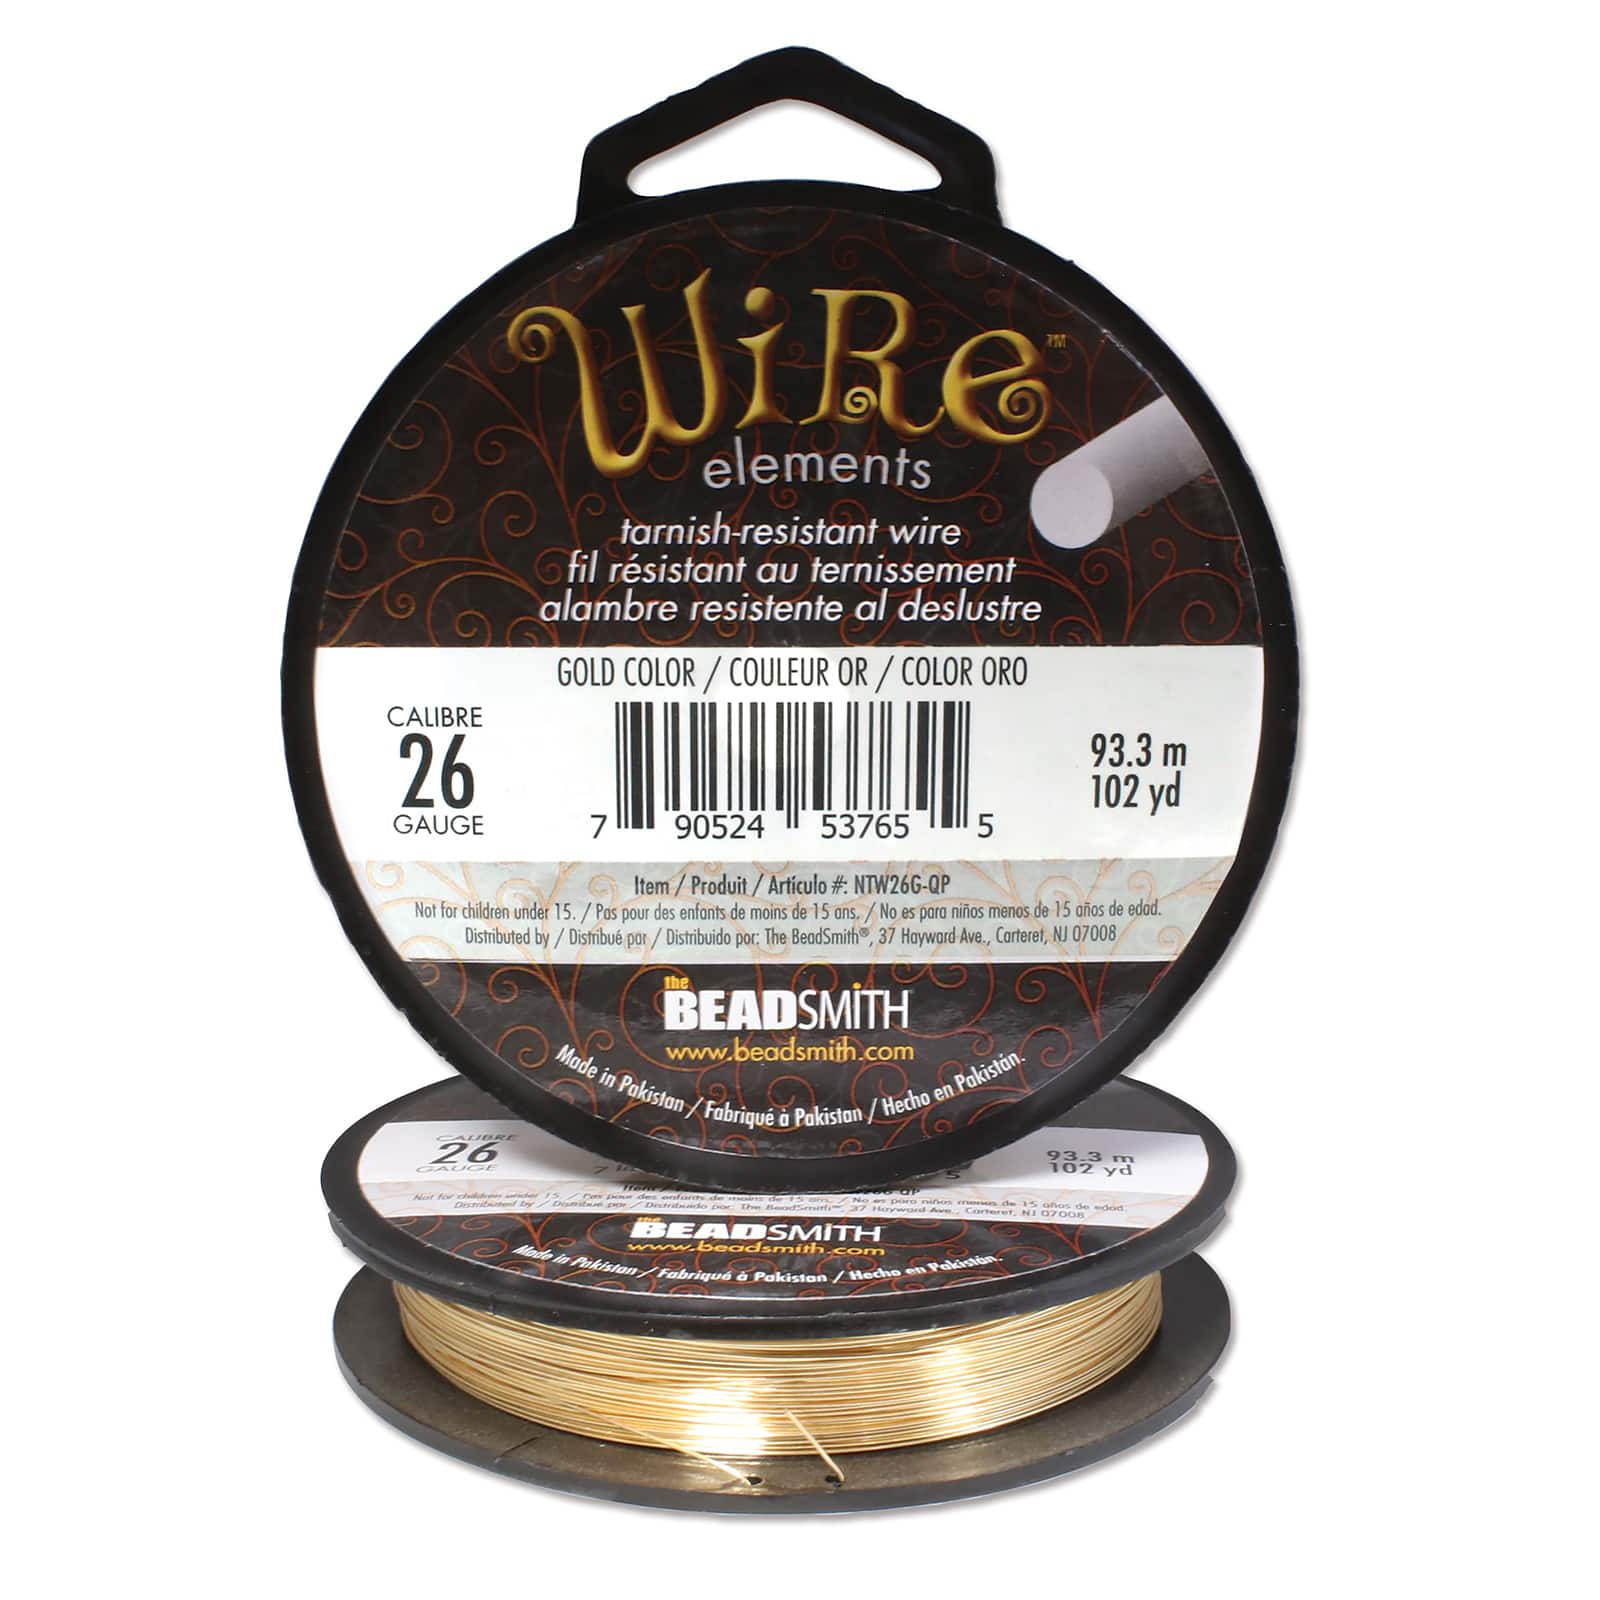 bead smith 22 gauge gold wire, wire elements, jewelry wire, gold